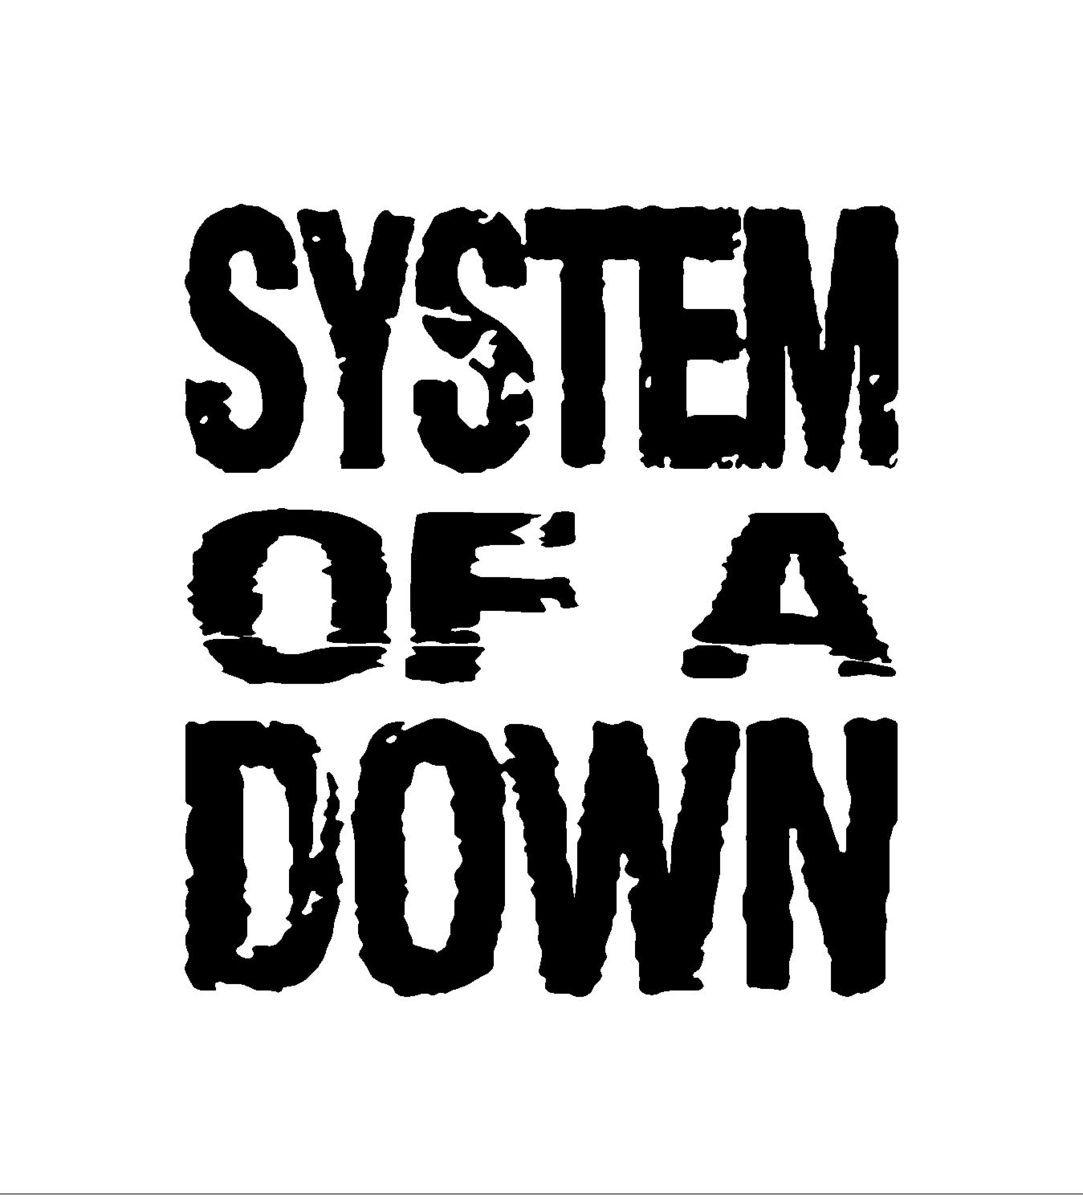 System of a Down Logo - System of a Down SOAD Band Logo Vinyl Decal Car Window Laptop Guitar ...